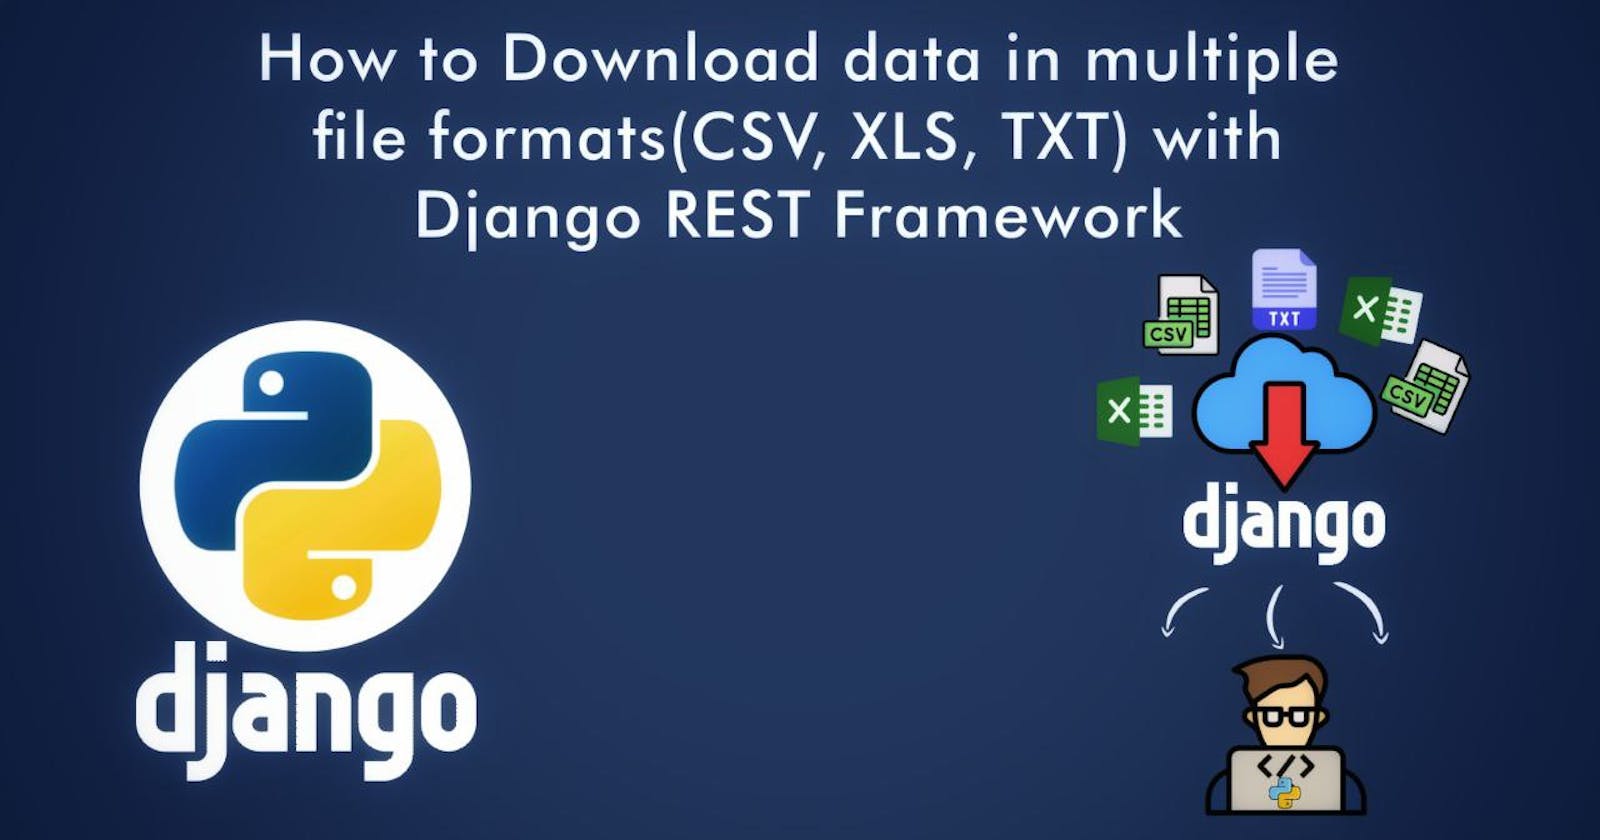 How to download data in multiple file formats (CSV, XLS, TXT) with Django REST Framework